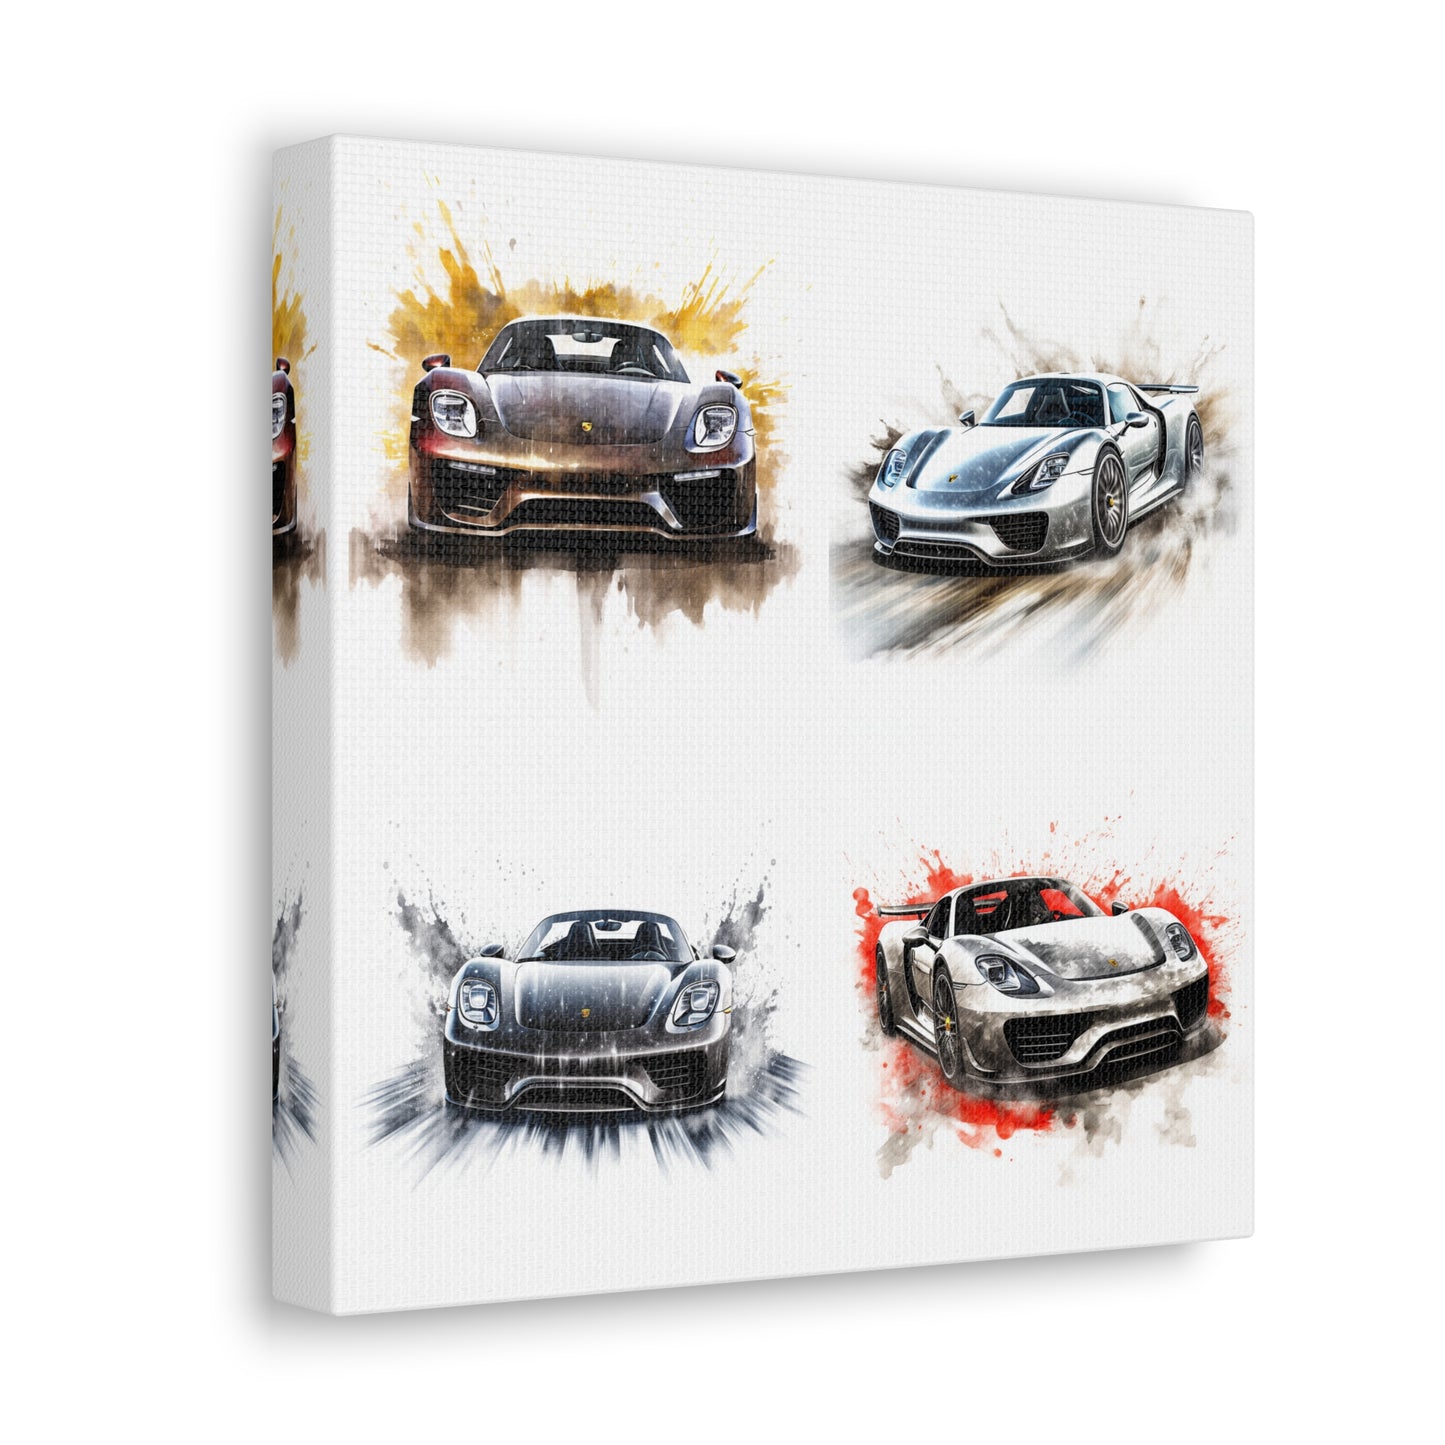 Canvas Gallery Wraps 918 Spyder white background driving fast with water splashing 5